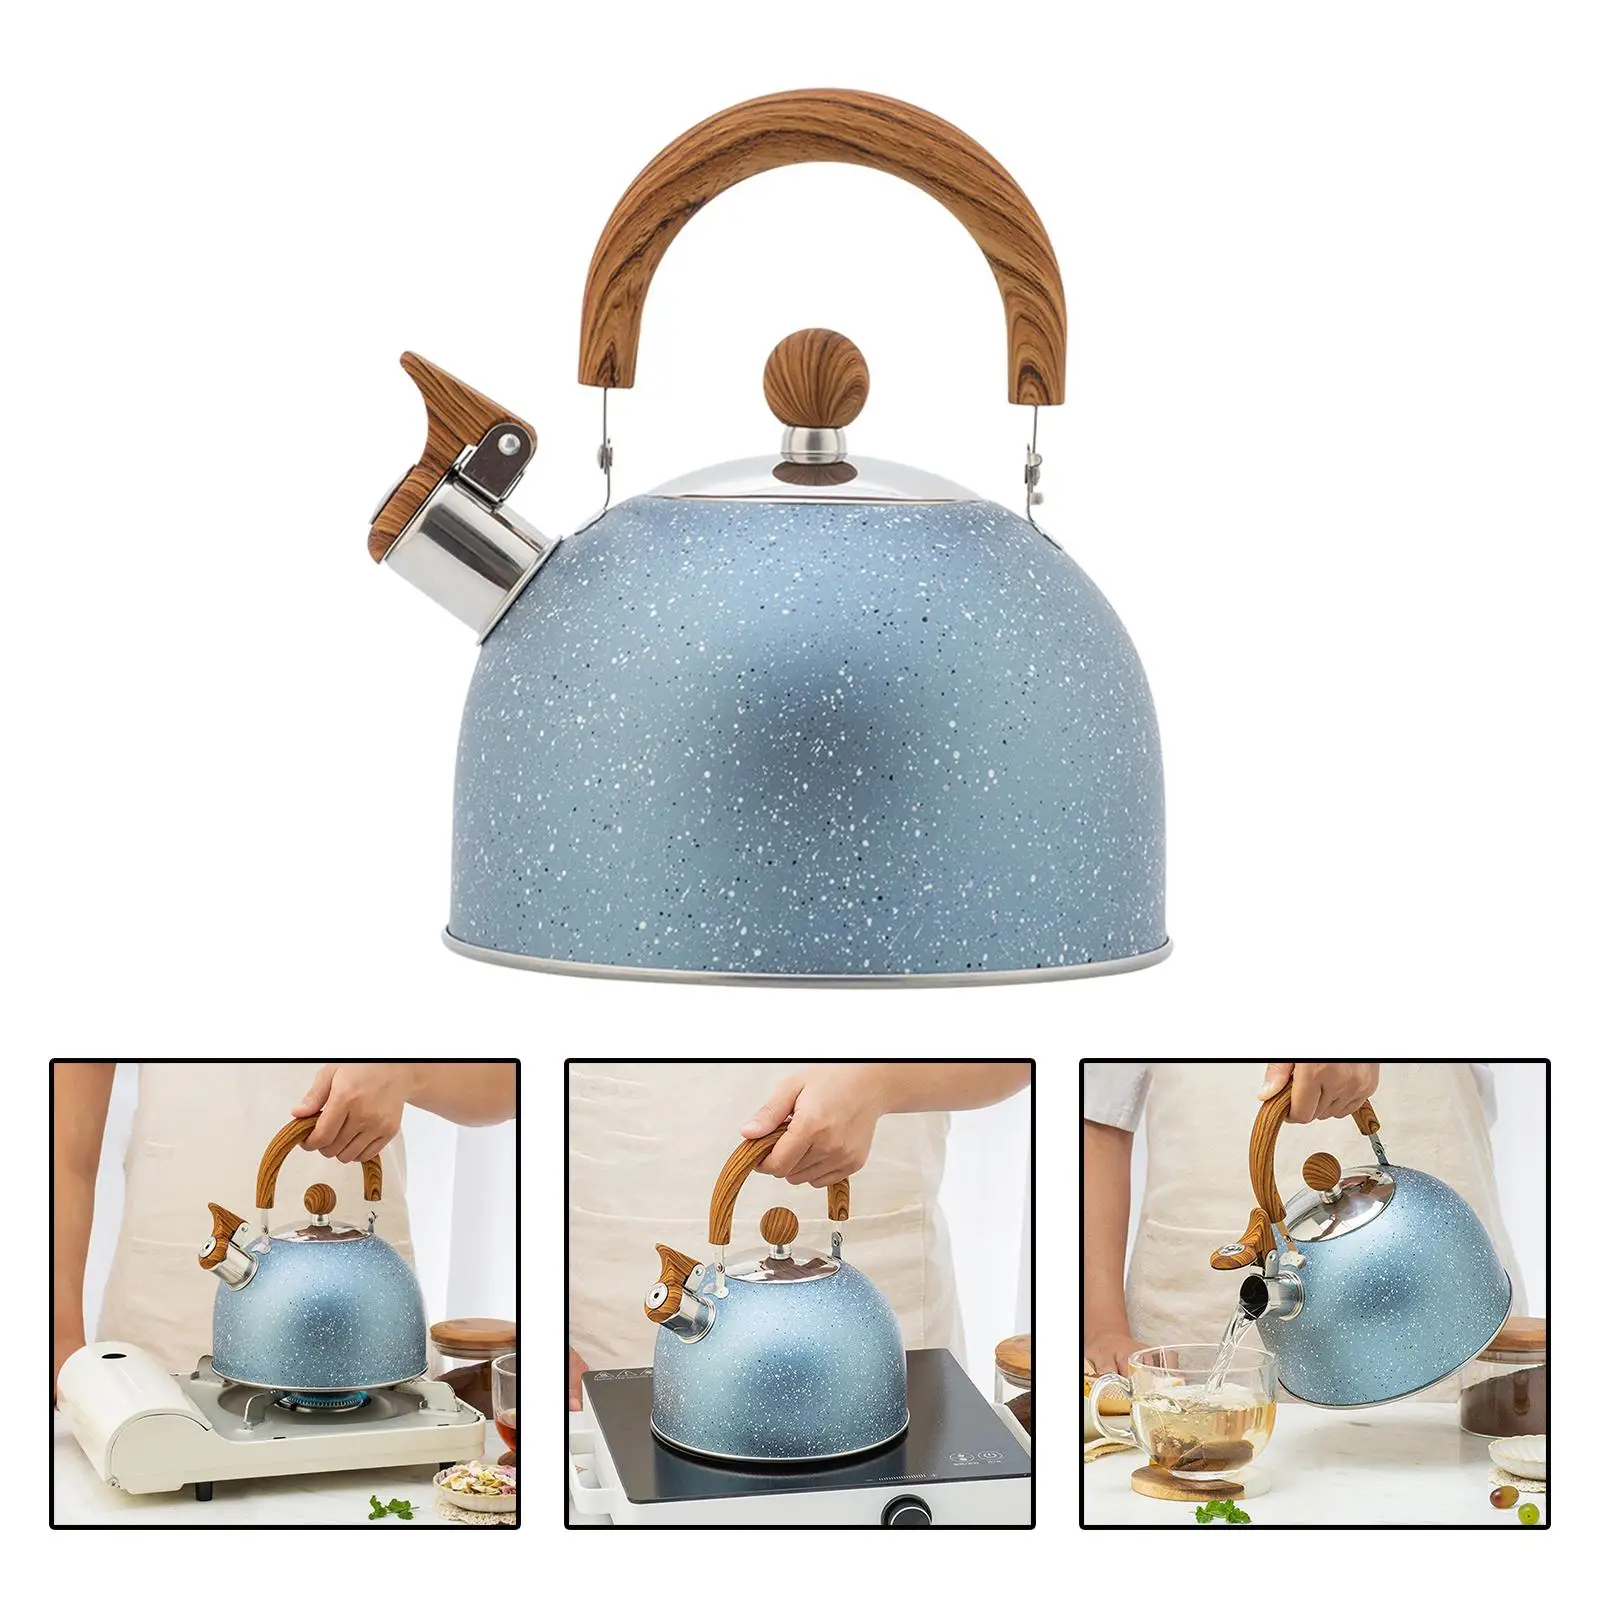 Portable Whistling Kettle Sounding Kettle 2.5L Large Capacity with Wooden Handle Coffee Tea Kettle for Home Kitchen